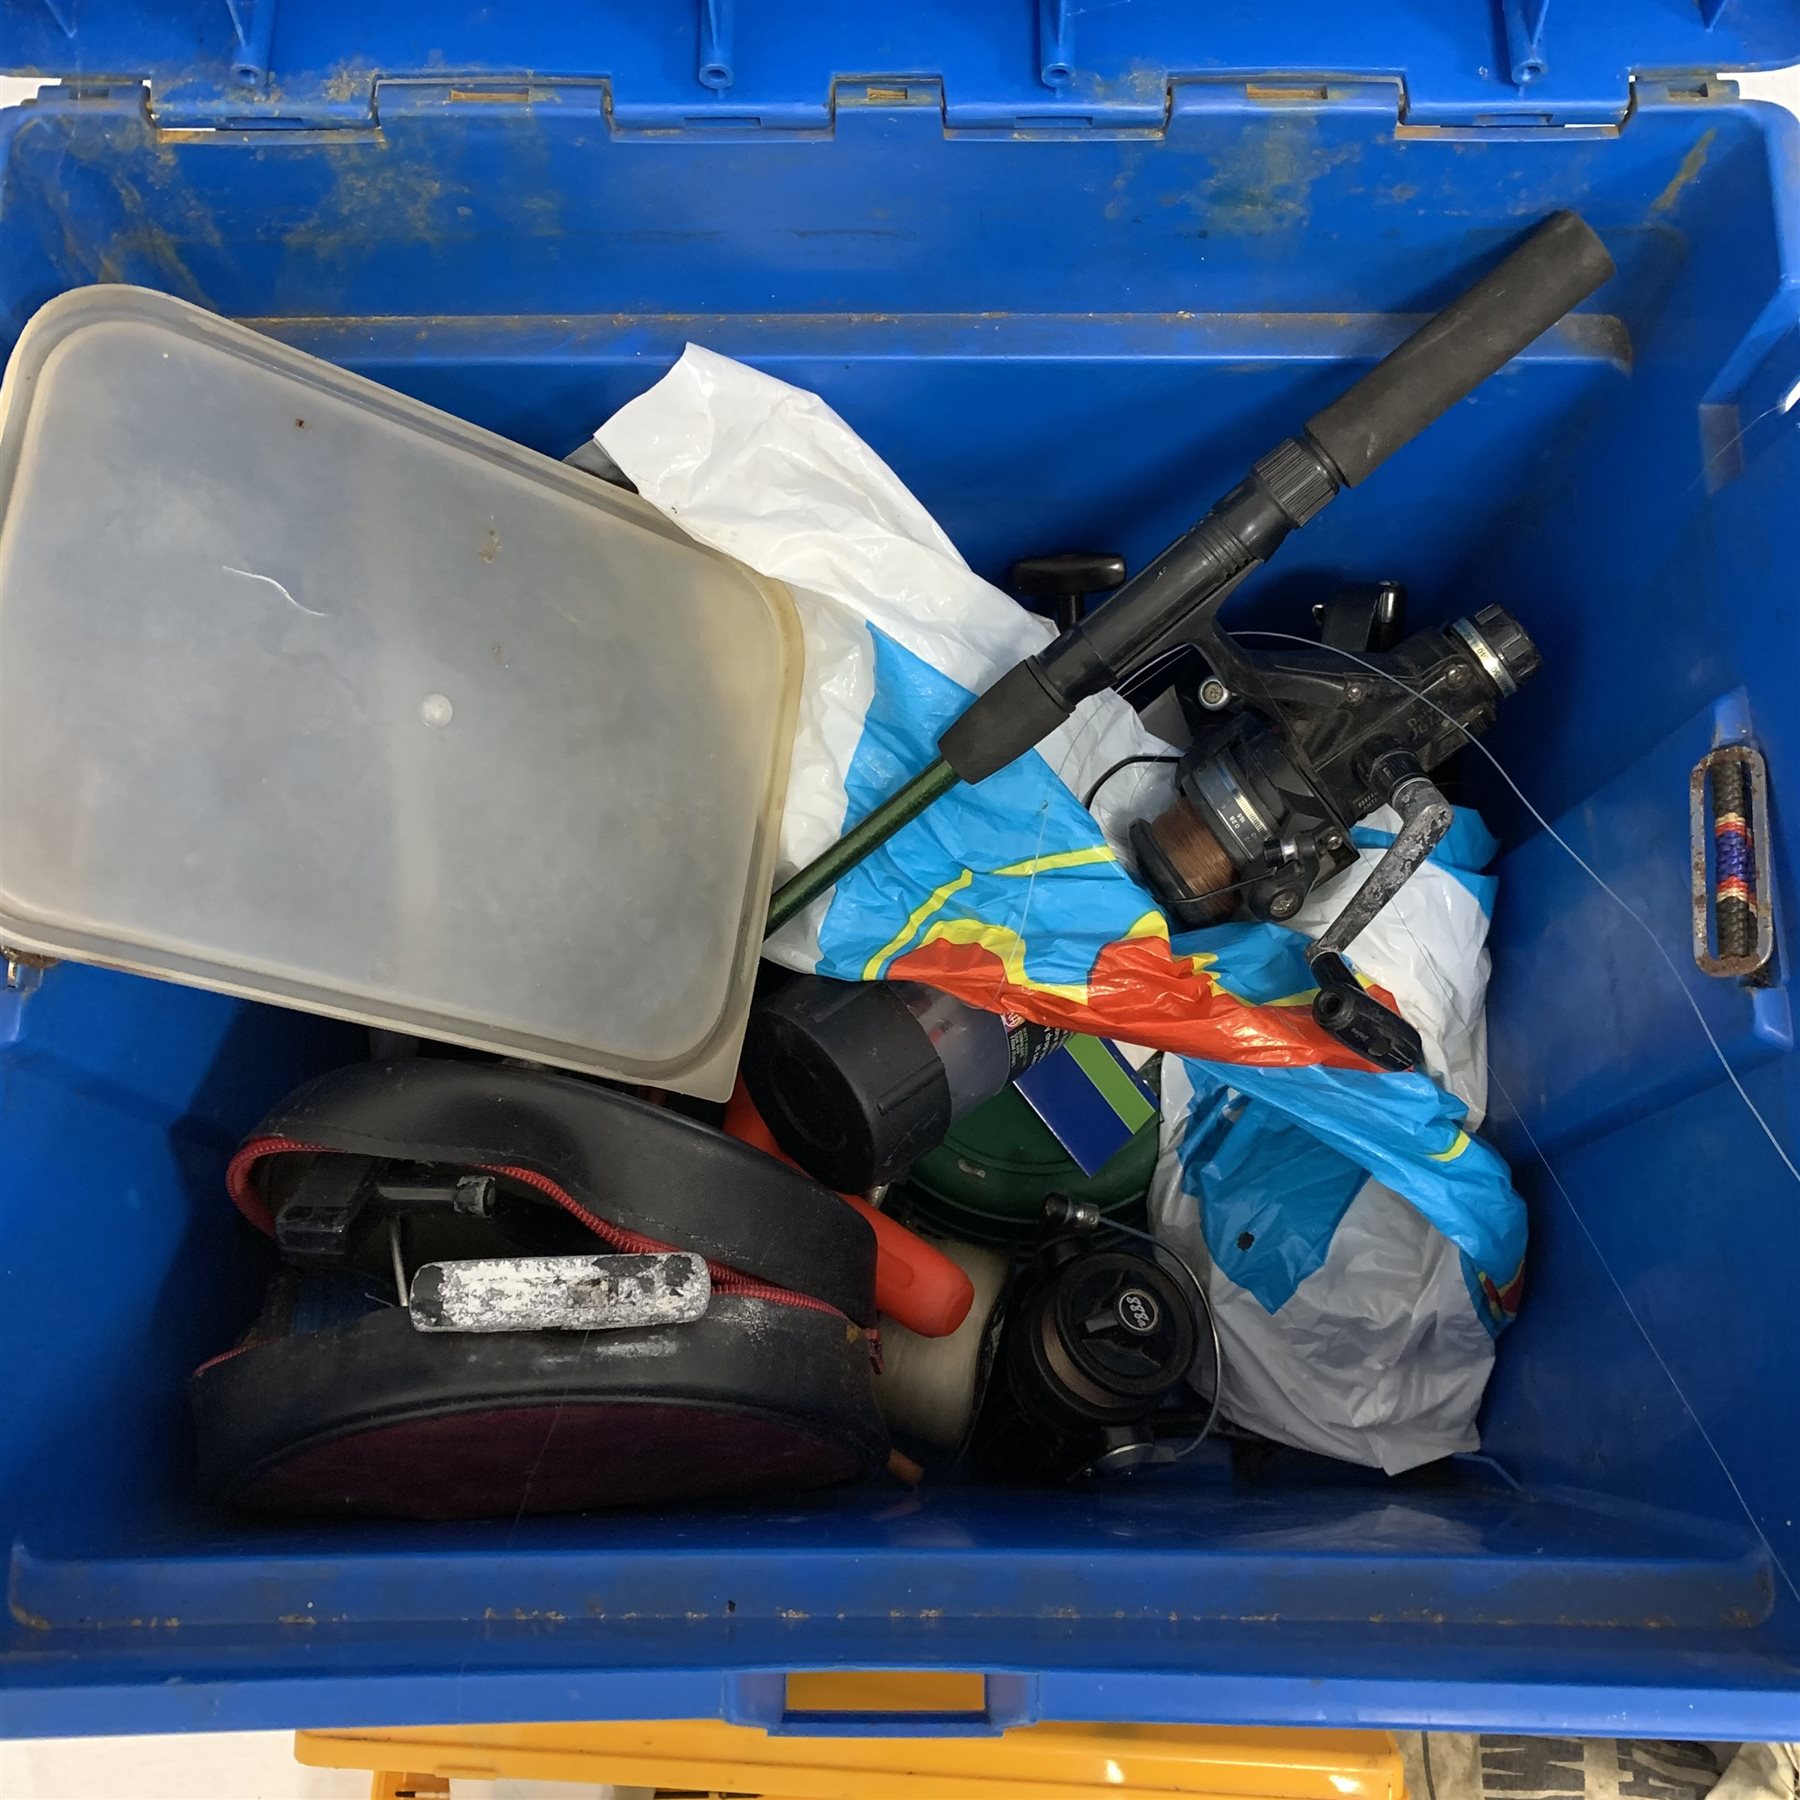 DS Shakespeare fishing tackle box and contents of Mitchell and